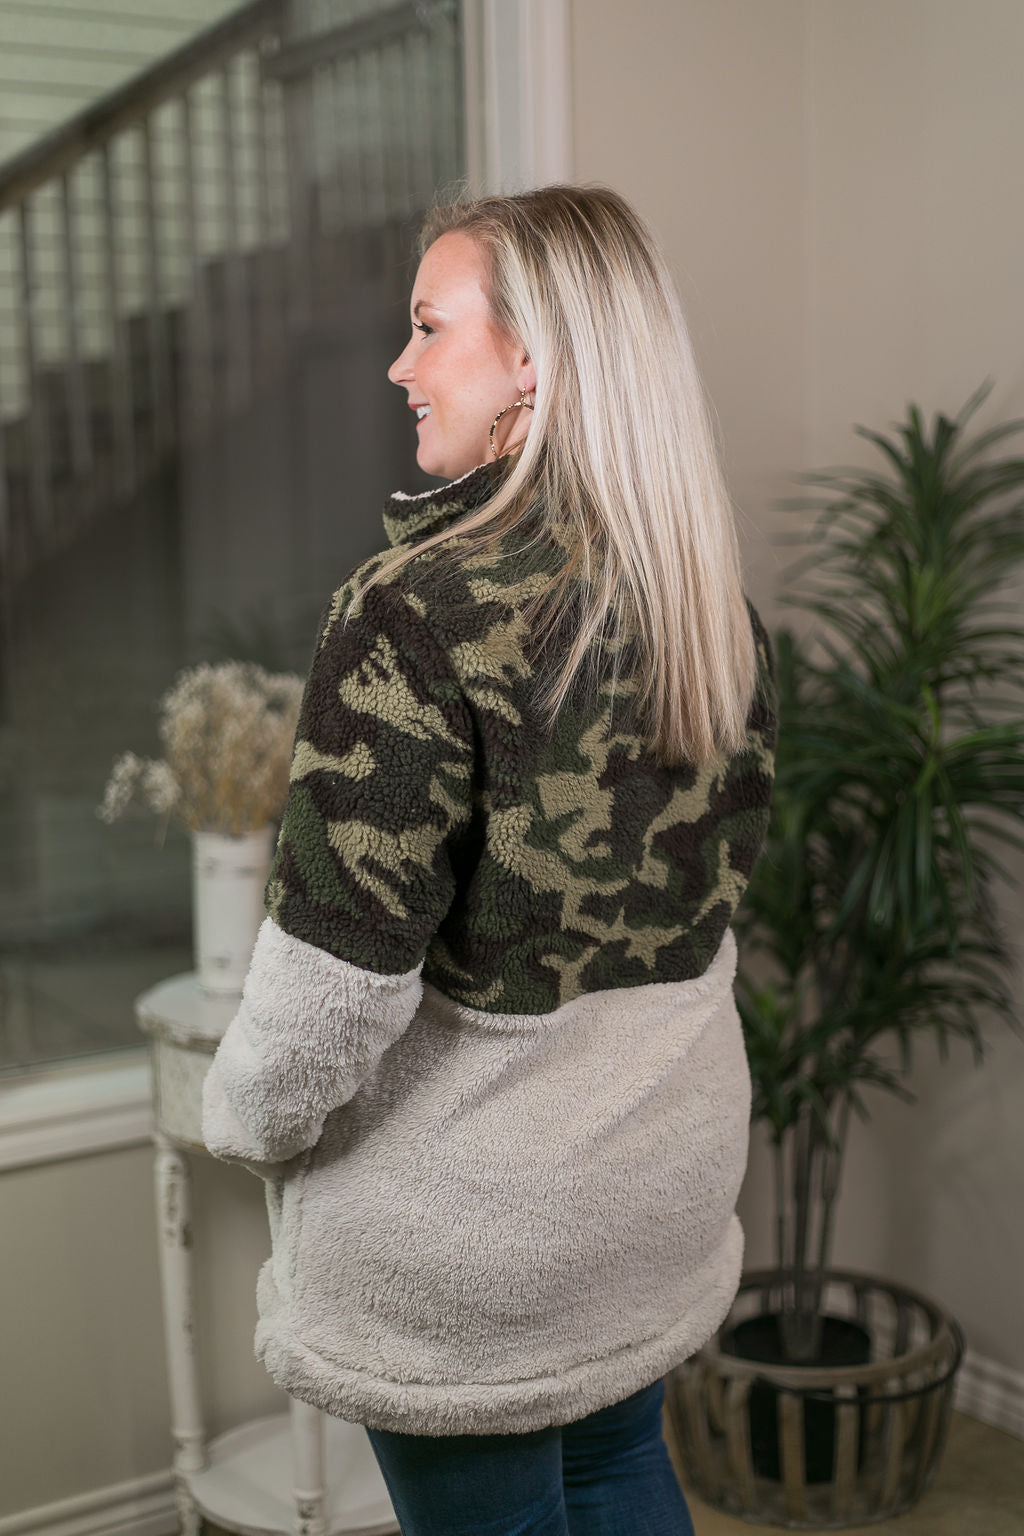 Chill of the Night Camouflage Sherpa Quarter Zip Pullover in Olive Green - Giddy Up Glamour Boutique